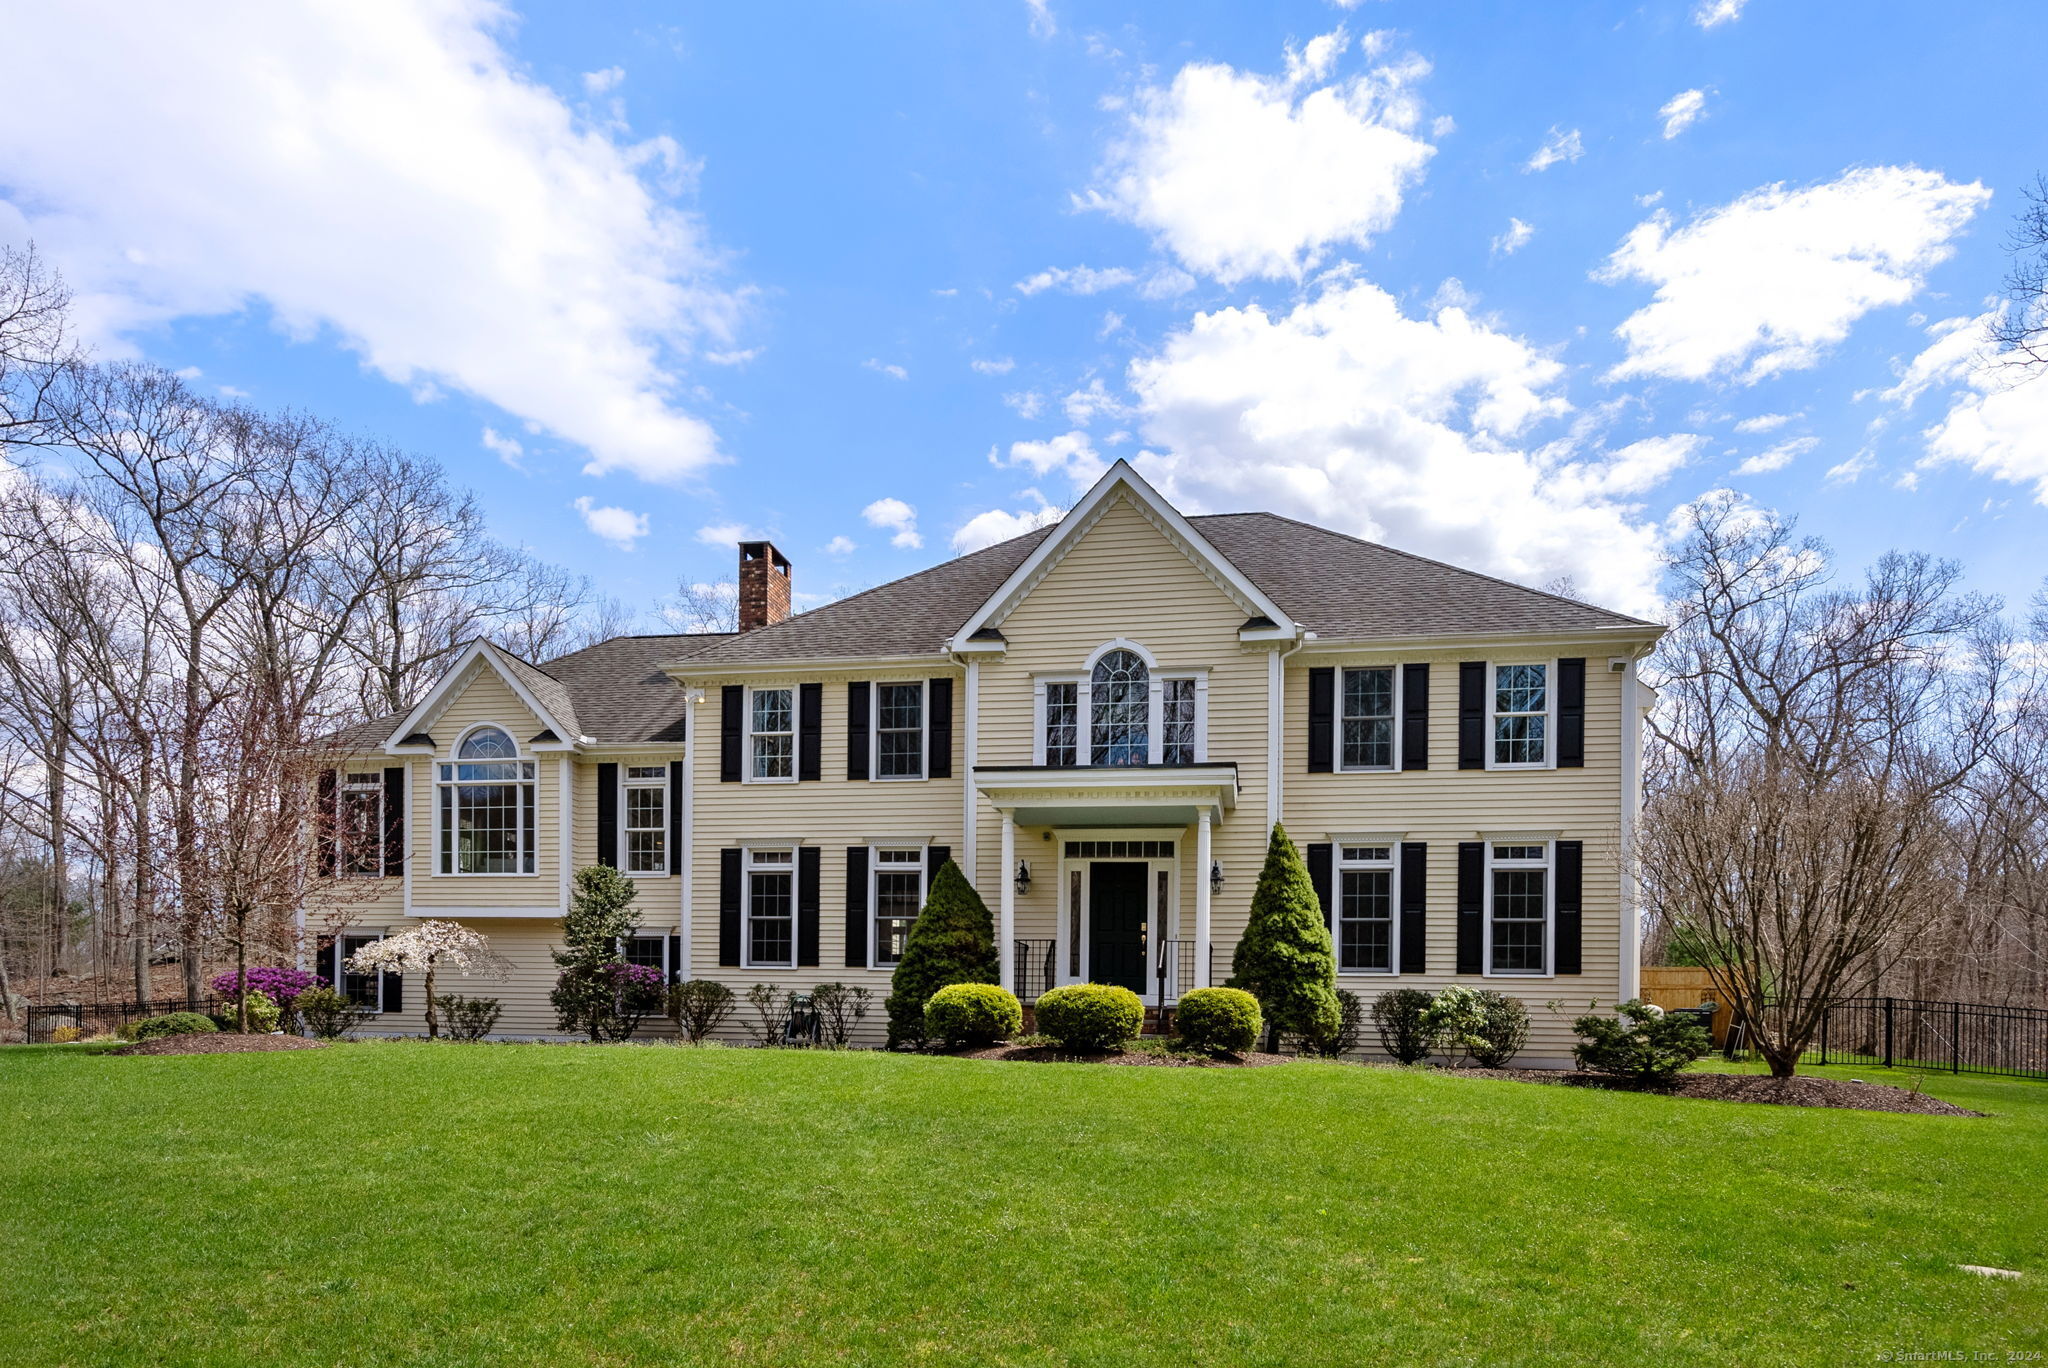 Welcome to this elegant custom colonial home, nestled on 3 acres of beautifully landscaped grounds, offering unparalleled privacy and tranquility. This home has it all, 4 bedrooms, over 4,000 sq ft, a layout for today's discerning homebuyers, move-in ready, custom mill work, rich hardwood floors throughout and a 20x40 salt water in-ground pool. A two-story foyer is flanked with a sophisticated living room w/ gas fireplace. The formal dining room w/ tray ceiling connects seamlessly to the kitchen boasting white cabinetry, island, gas cooktop, premium appliances, a dining area and slider to the backyard retreat. A grand sun-soaked family room with Palladian windows, a gorgeous stone fireplace gives way to a sunroom w/ 3 walls of windows, ideal for a home office or creative space. The upper level houses a fabulous primary bedroom w/ gas fireplace, walk-in closet and spa-like bathroom w/ double sink, jetted tub and spacious shower. Three addt'l well-appointed bedrooms with abundant closet space, one ensuite and a shared hallway bath w/ double sink. Addt'l features are main floor office and laundry room, freshly interior painted, new boiler, underground utilities, generator hookup, 3 car garage, irrigation system and full deep basement w/ easy expansion. The backyard oasis showcasing a saltwater pool, electronic solar cover, waterfall feature, and slide set this home apart. It's complete with a fully fenced-in backyard w/ a fire pit, large patio, and an outdoor shower! A must see!